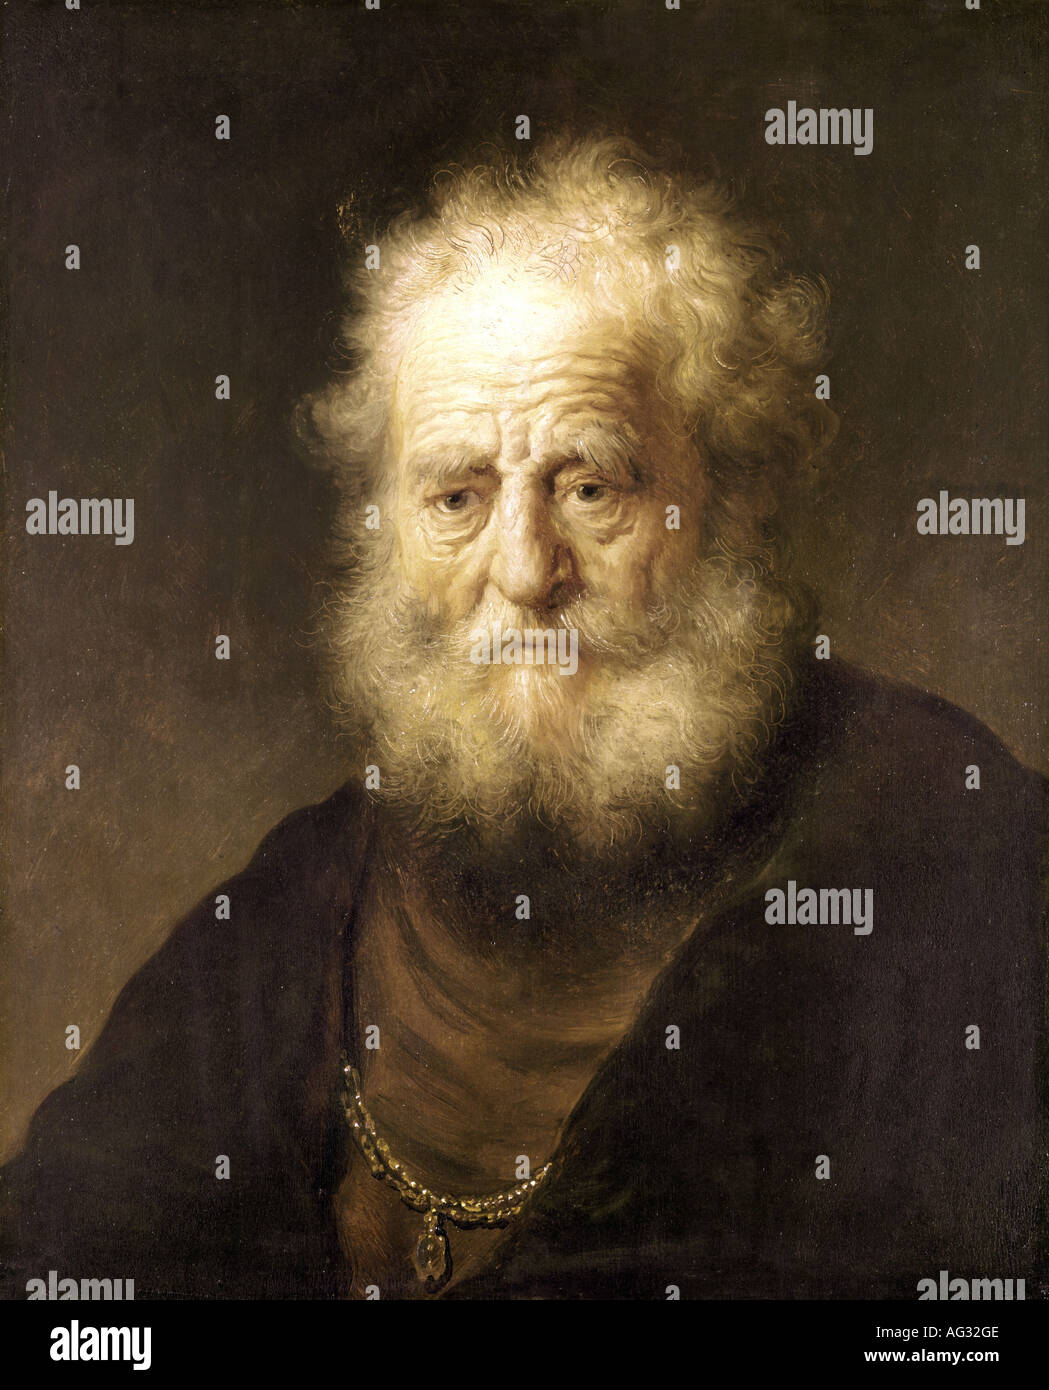 fine arts, Rembrandt Harmensz van Rijn 15.7.1606 - 4.10.1669, painting, 'Portrait of an old man with golden necklace', 1632, oil on panel, 59,3 cm x 49,3 cm, state museum, Kassel, Germany, Artist's Copyright has not to be cleared Stock Photo